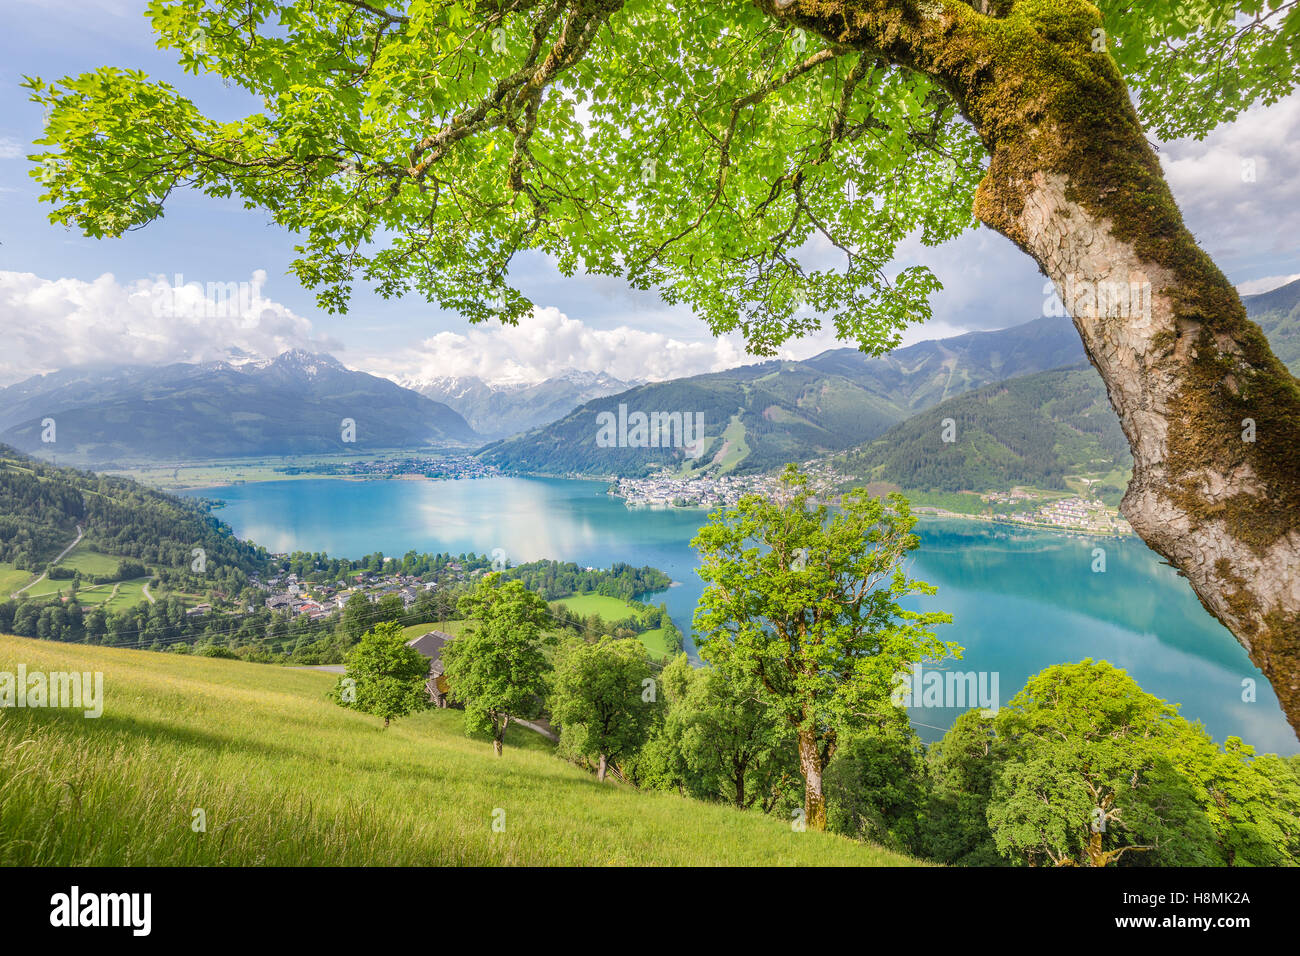 Beautiful mountain scenery in the Alps with clear lake and meadows full of blooming flowers in summer, Zell am See, Austria Stock Photo